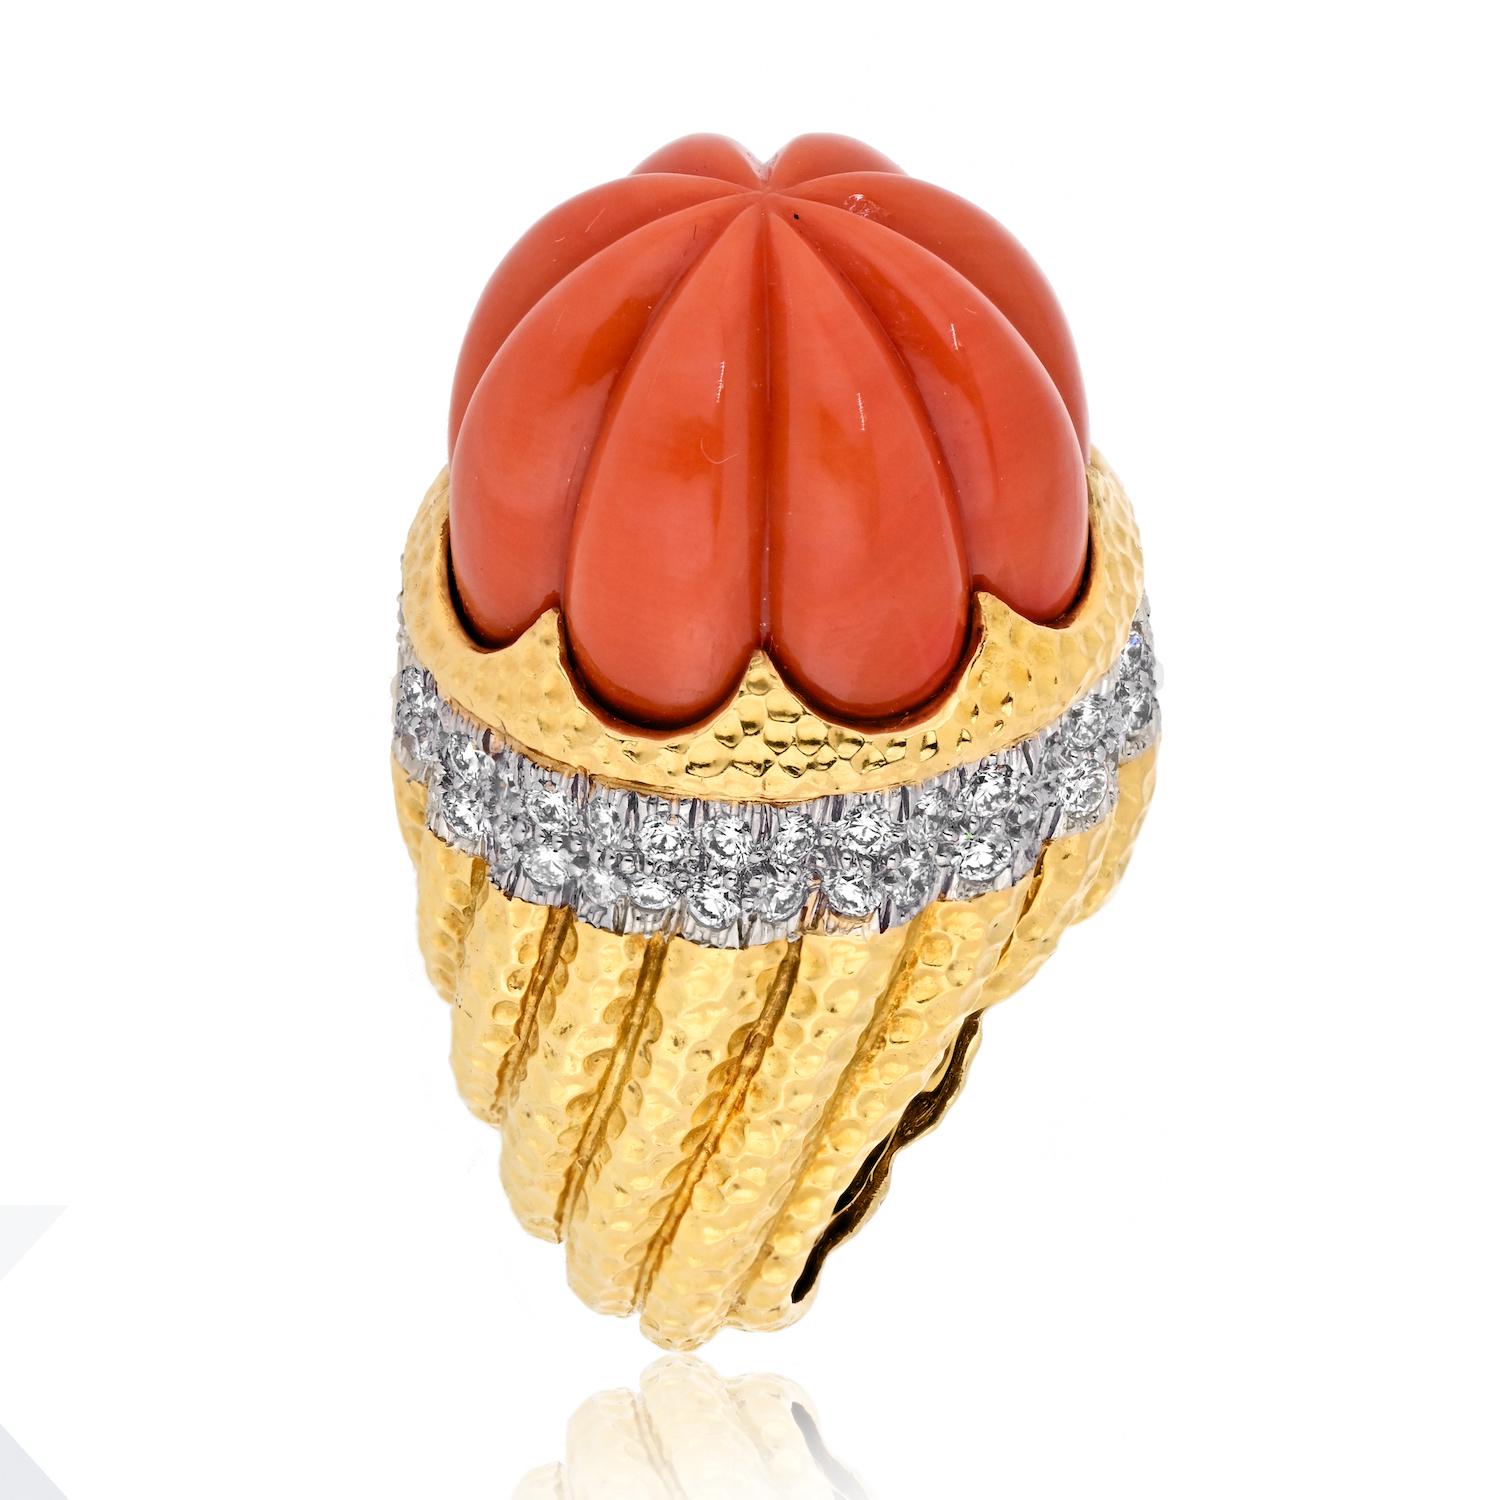 Immerse yourself in the luxurious beauty of the David Webb Platinum & 18K Yellow Gold Carved Coral Diamond Rim Ring, a statement piece that showcases a significant coral centerpiece surrounded by sparkling round diamonds.

**Key Features:**

1.